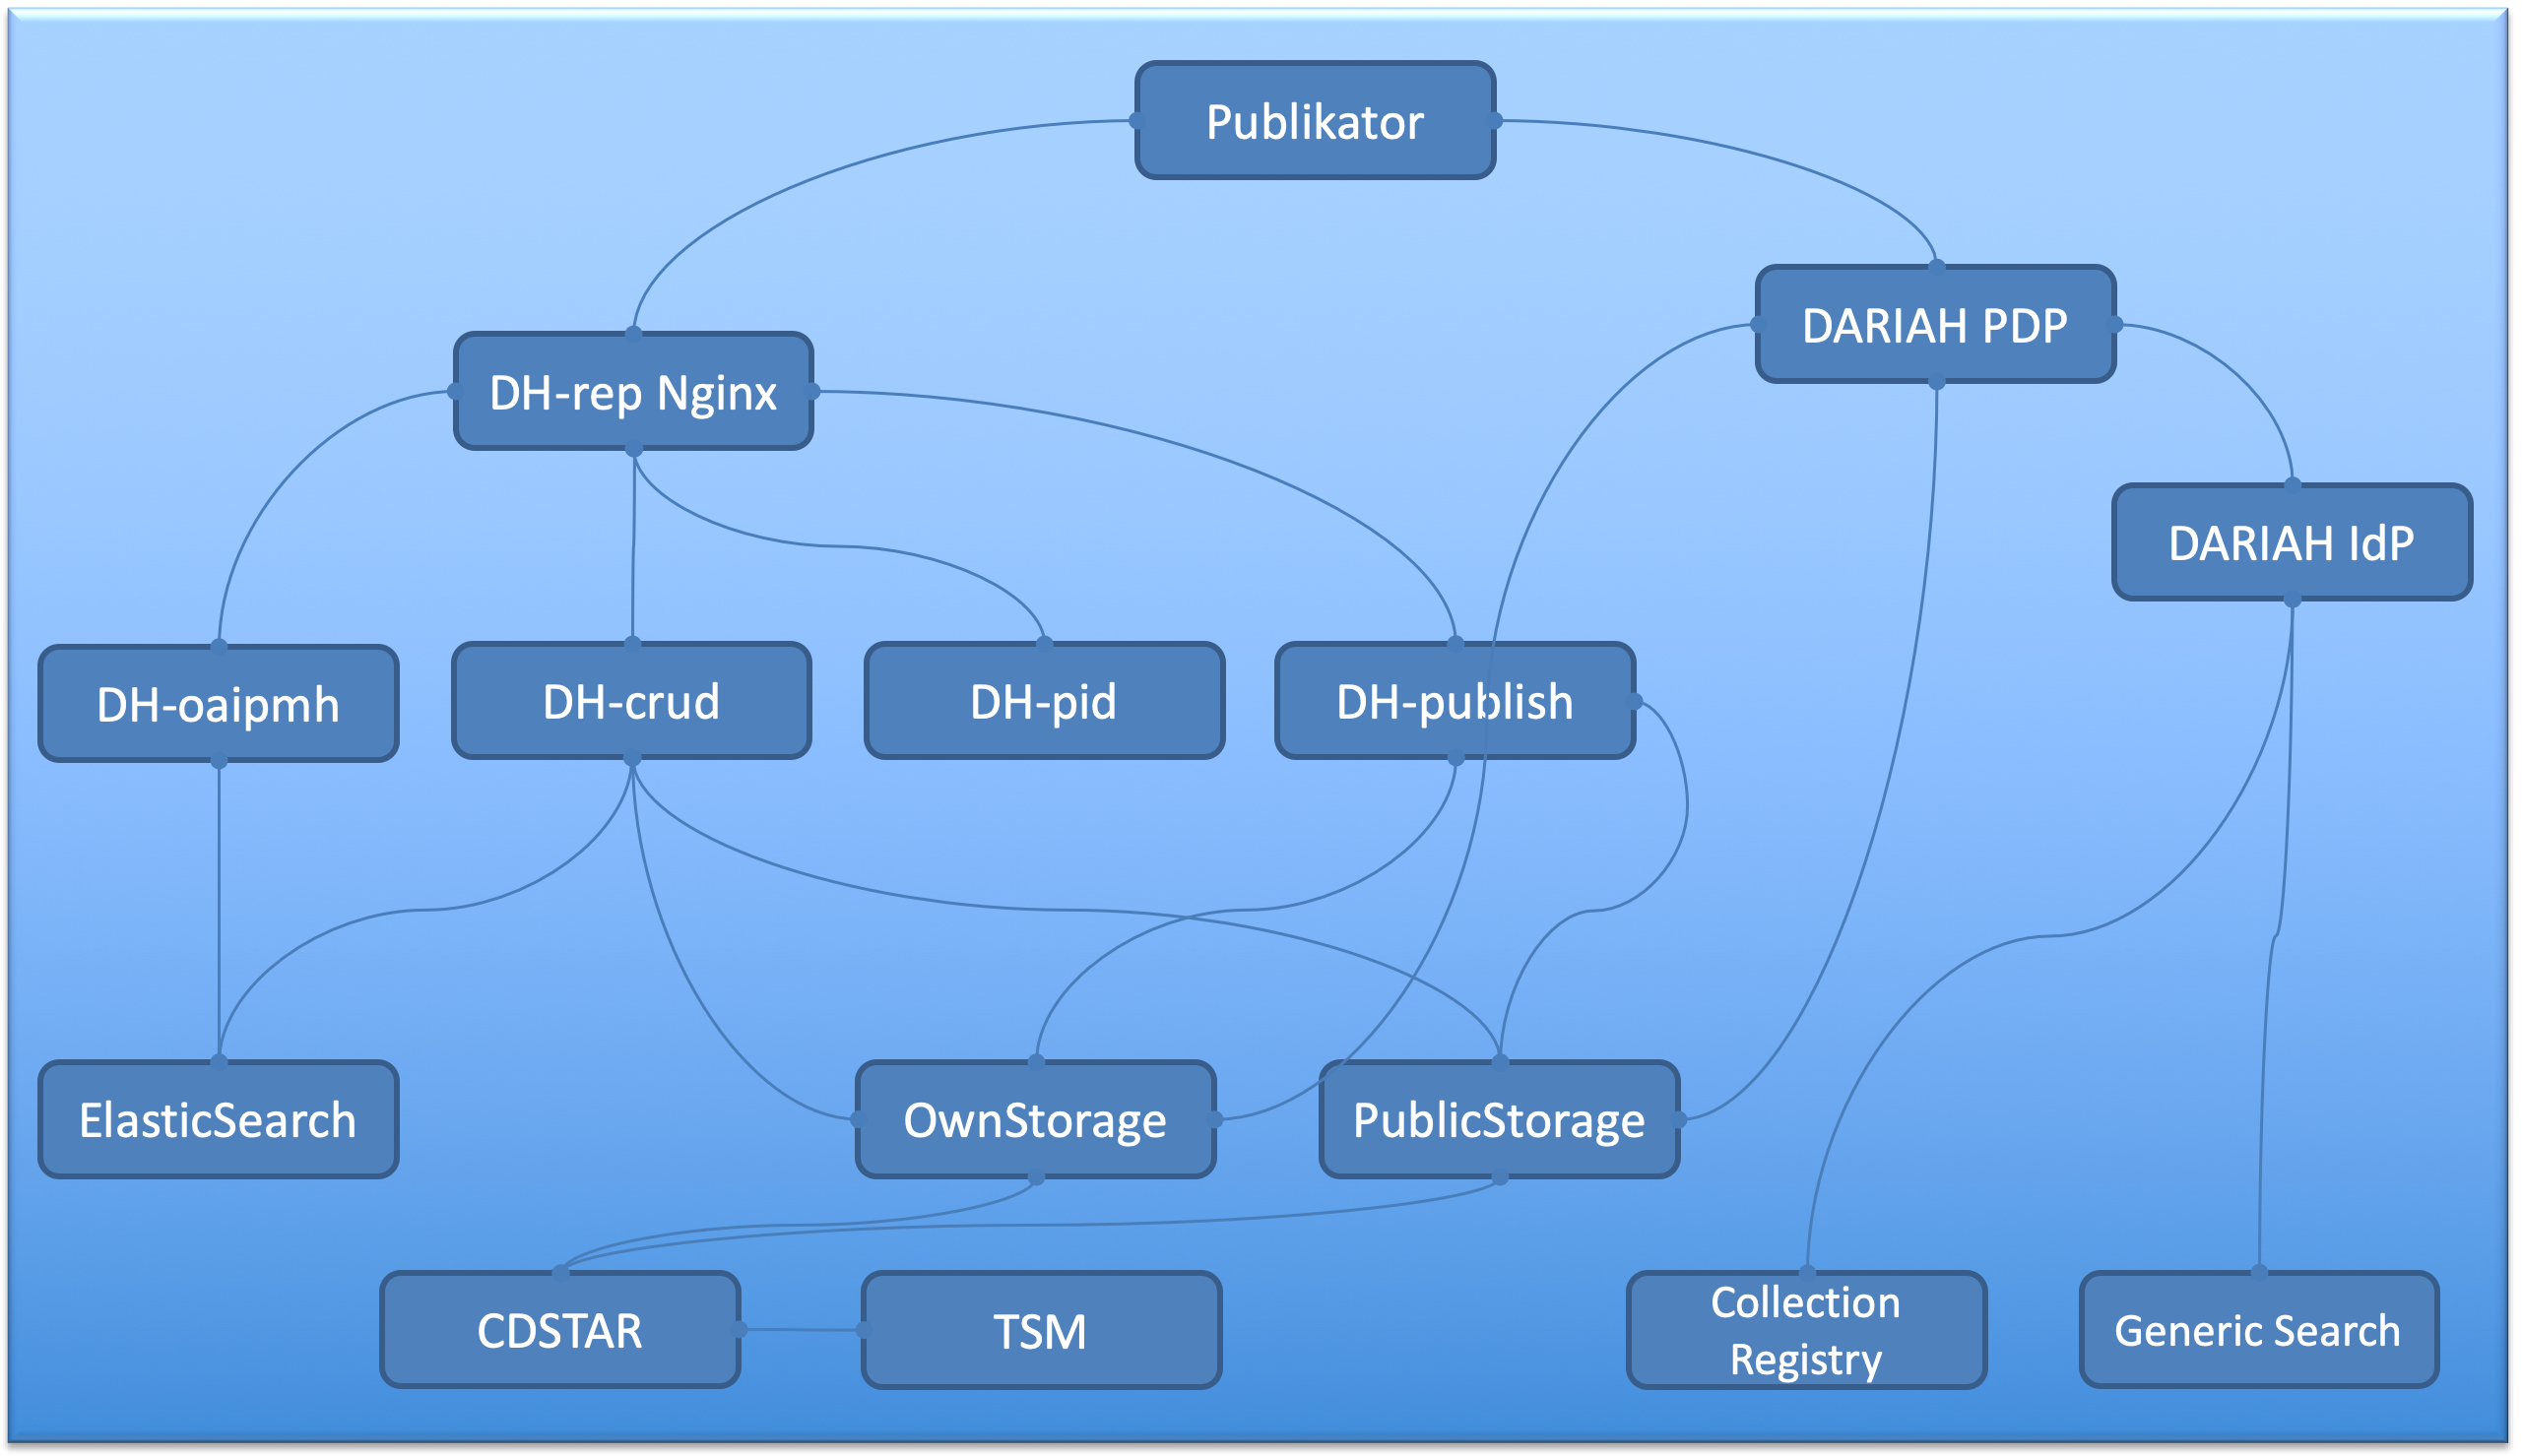 Fig. 5: A dependency chart of the DARIAH-DE Repository architecture and involved services